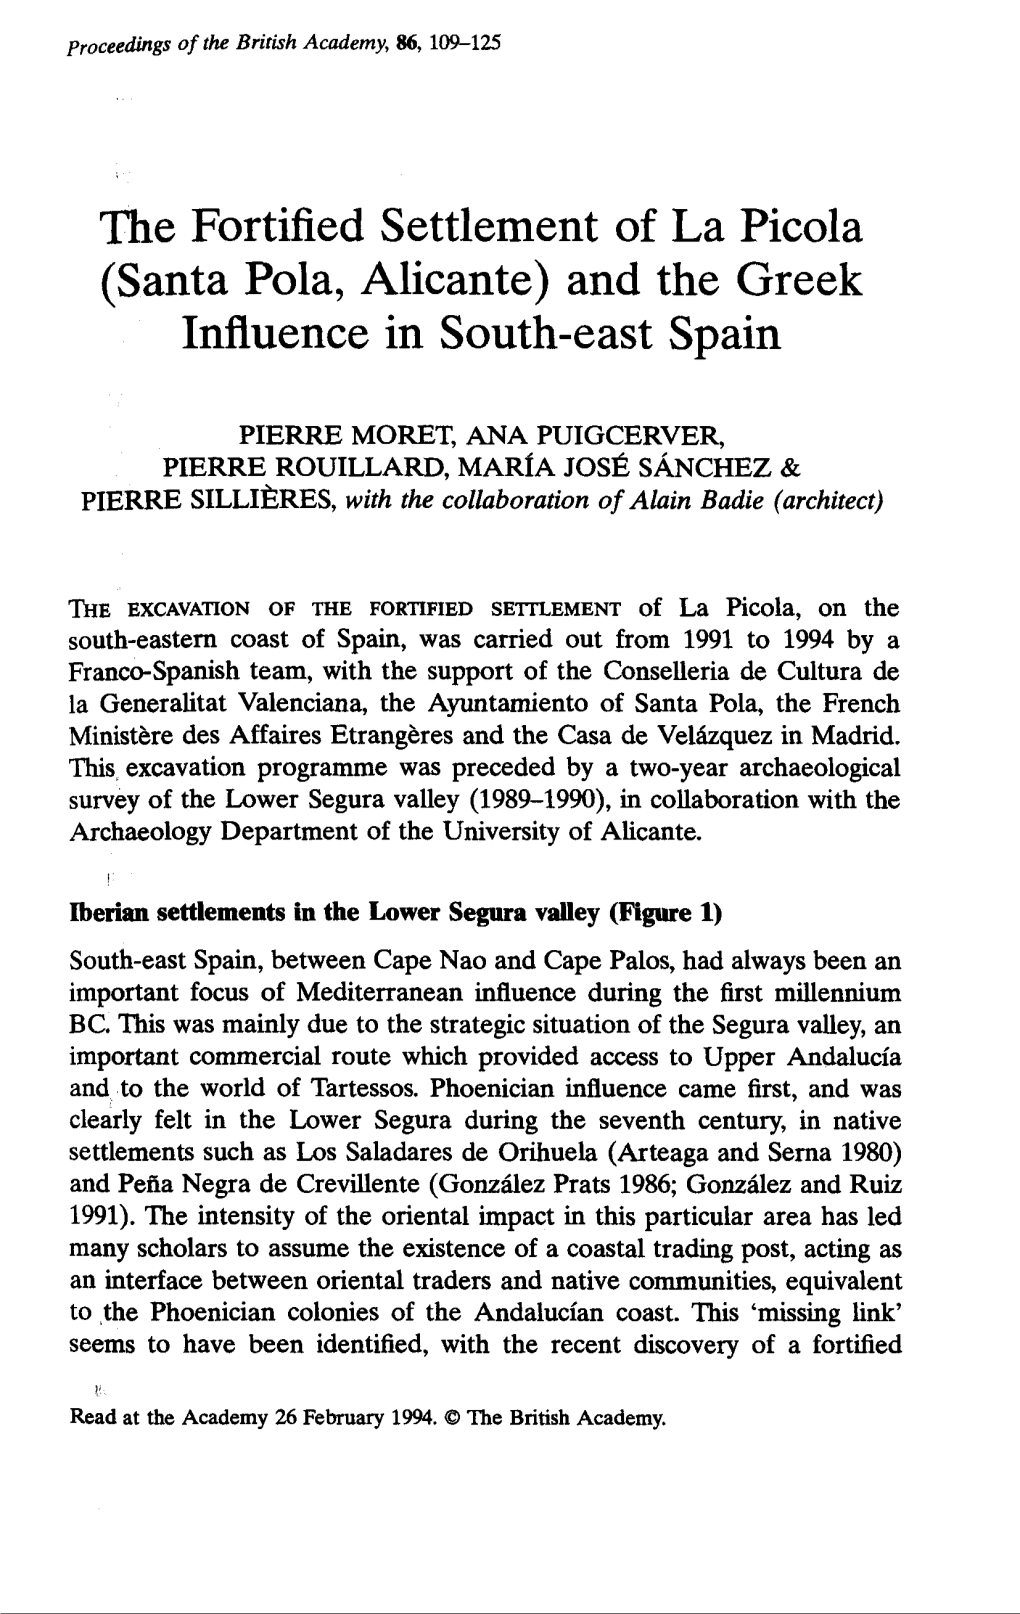 Santa Pola, Alicante) and the Greek Influence in South-East Spain